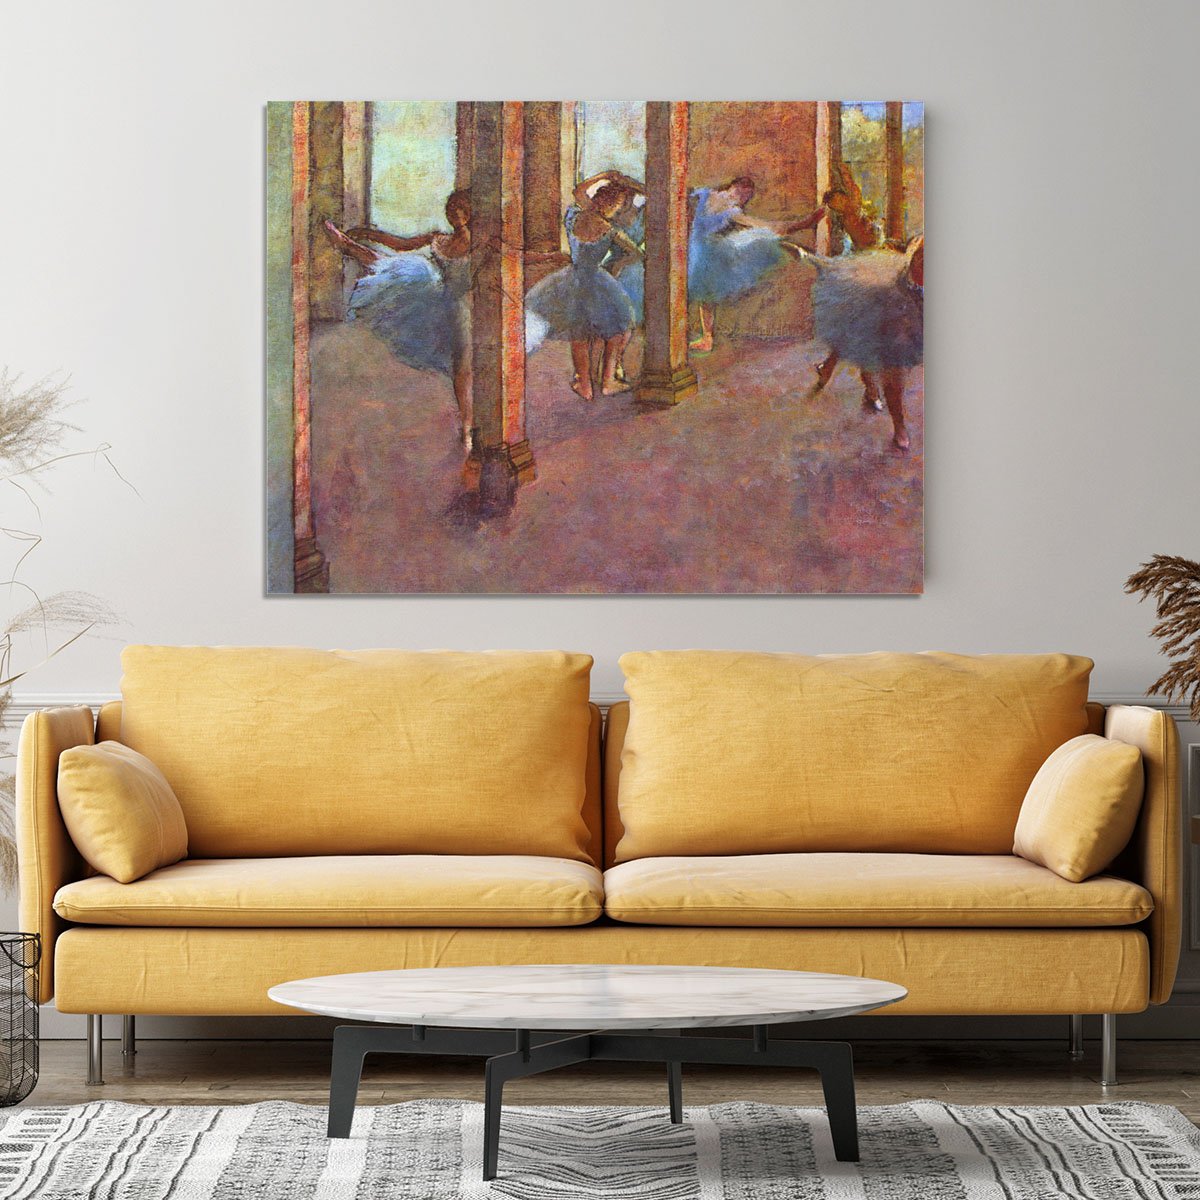 Dancers in the Foyer by Degas Canvas Print or Poster